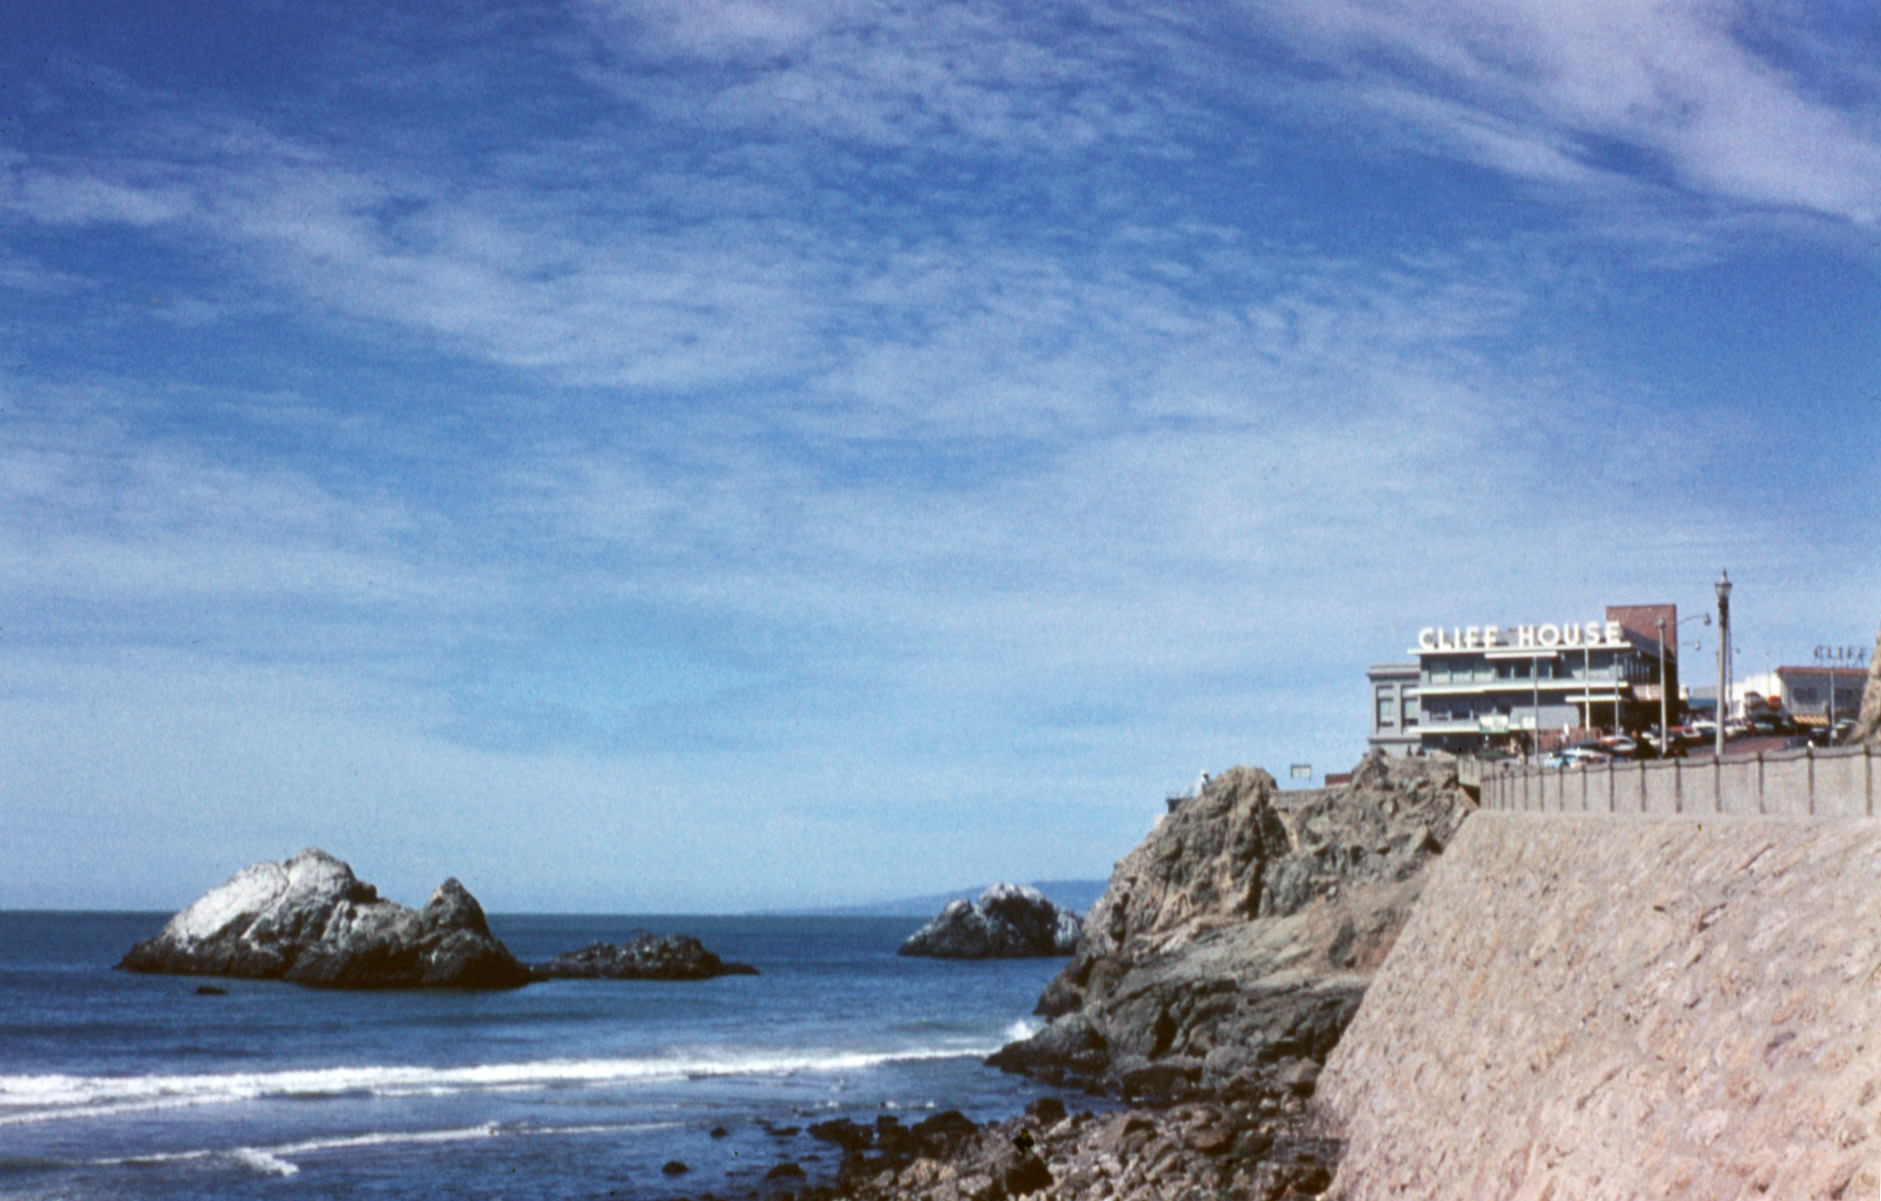 This is the famous "Cliff House" restaurant in 1959, which, in one form or another, has been a fixture in San Francisco for over a century. Located on the edge of Golden Gate Park, it's still there today in a modernized form. I'm sure it's a great restaurant, but judging from the current prices on the menu I'm guessing that our family of four were just on a sightseeing tour and ate dinner somewhere else! View full size.